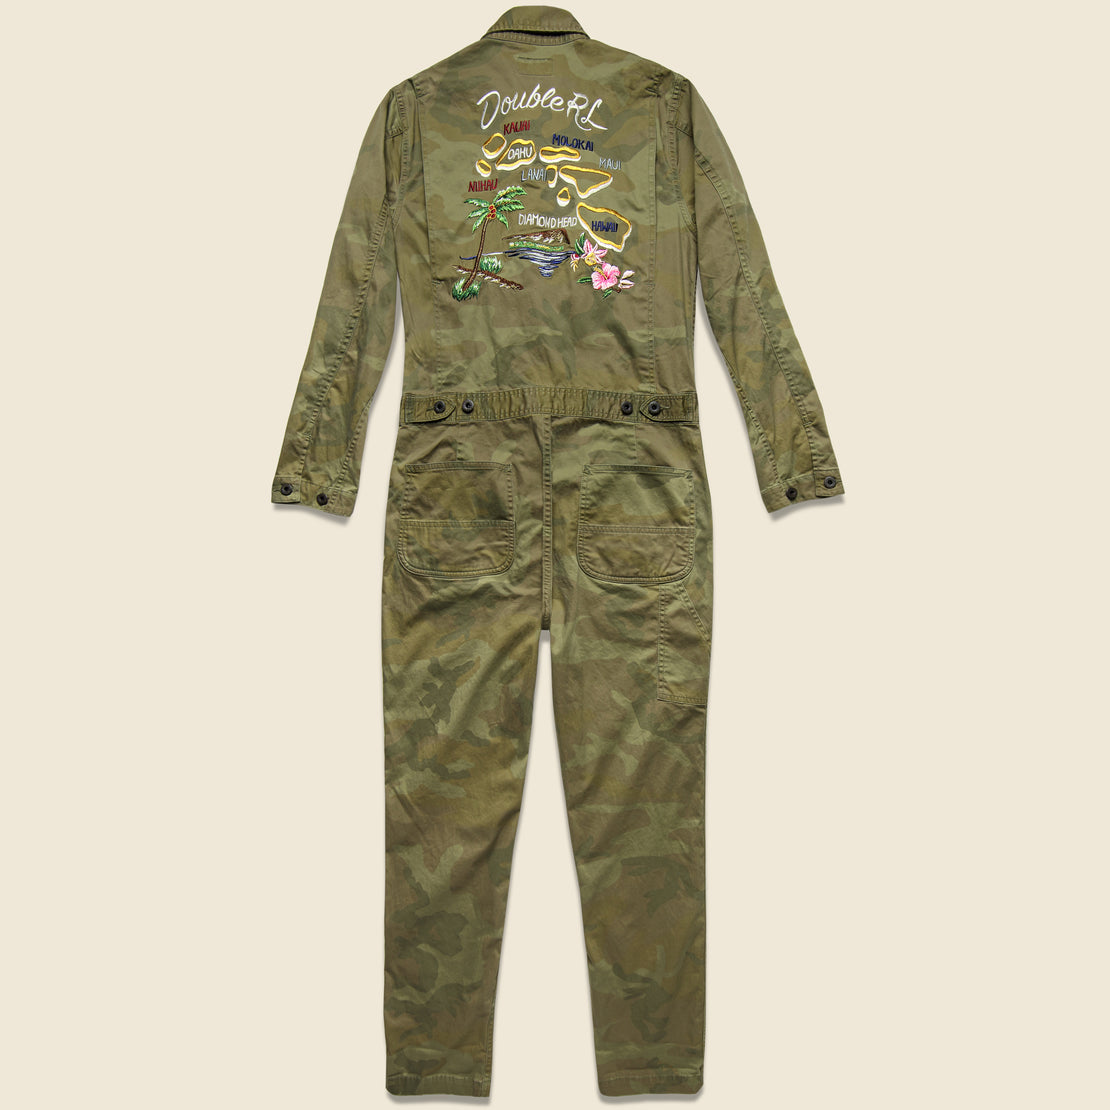 Hilltop Coverall - Japanese Woodland Camo - RRL - STAG Provisions - W - Onepiece - Jumpsuit